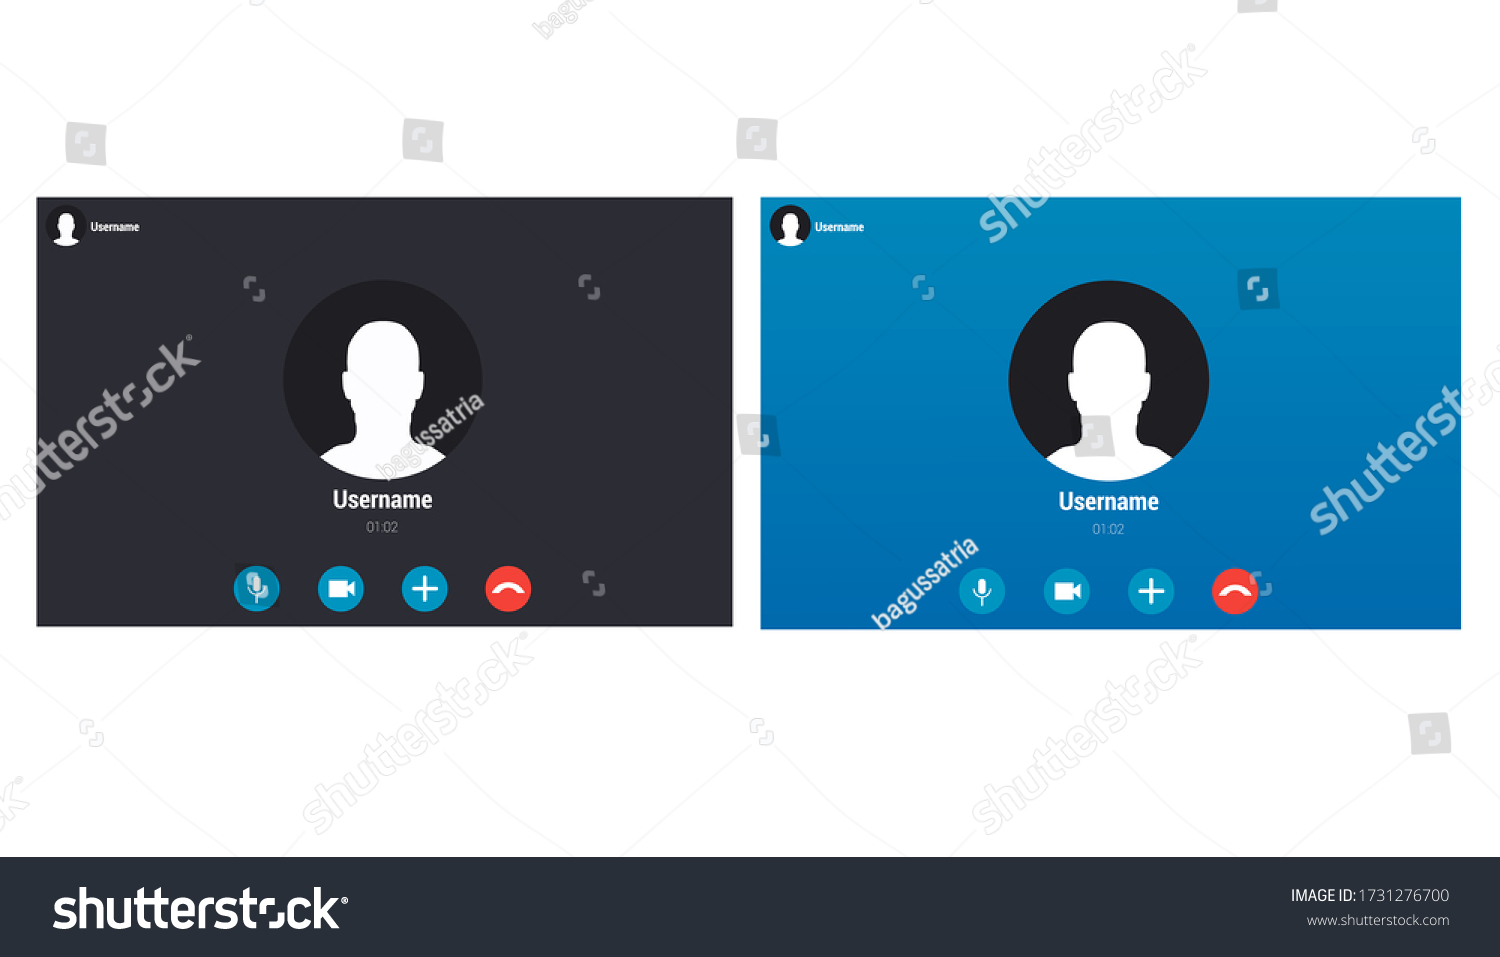 transparent iphone incoming call screen template